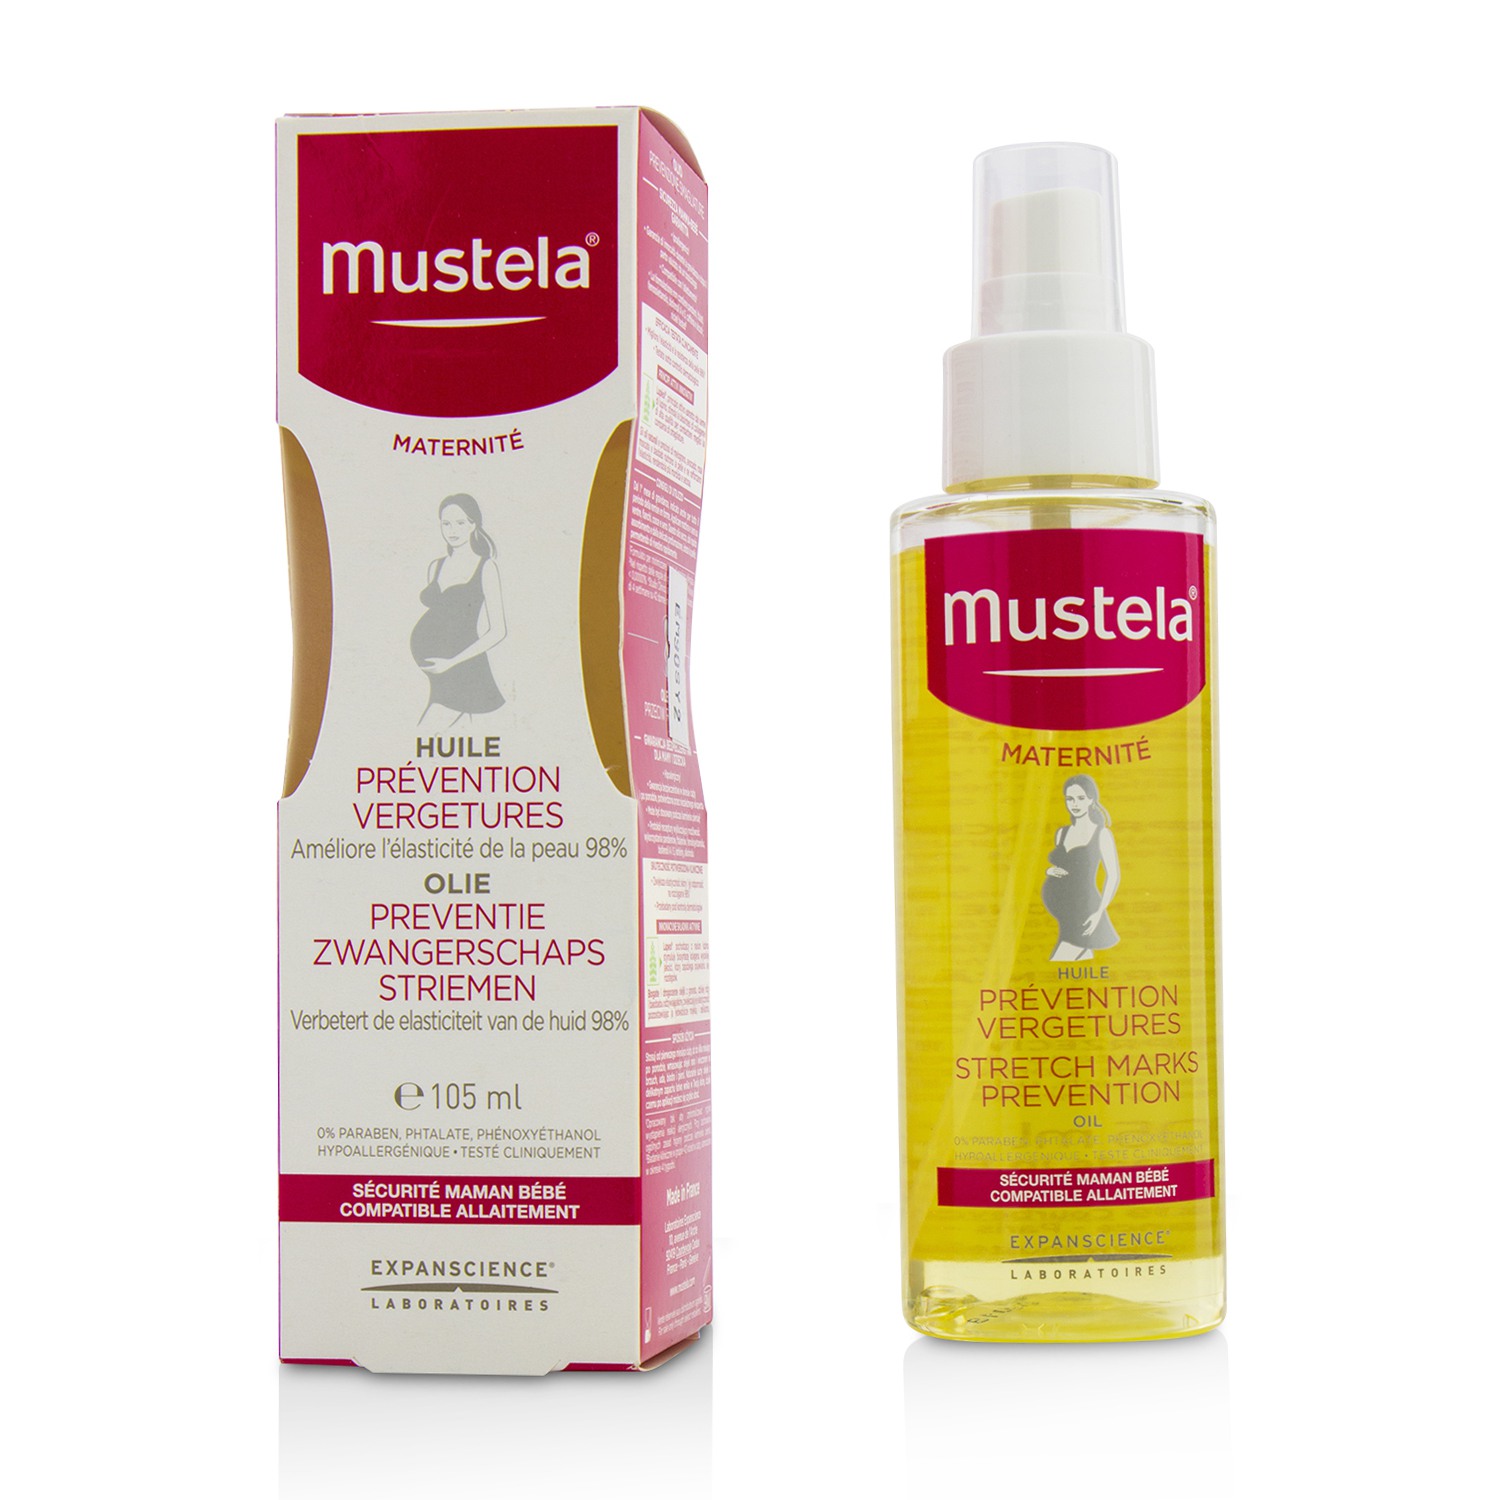 Stretch Marks Prevention Oil Mustela Image